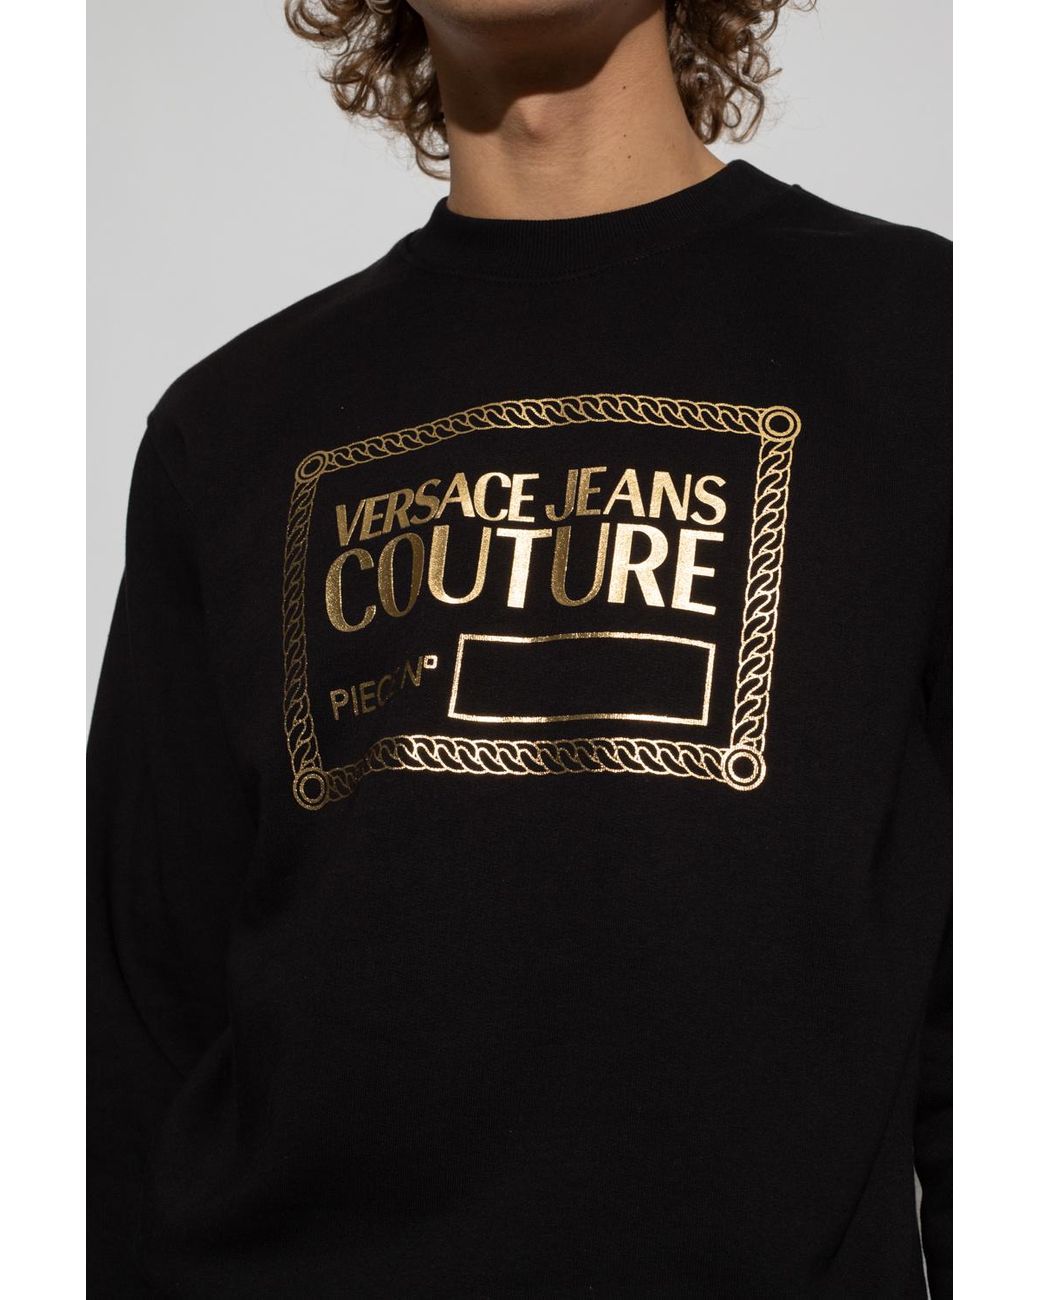 Versace Jeans Couture Denim Label Sweatshirt in Black for Men gym and workout clothes Sweatshirts Mens Clothing Activewear 